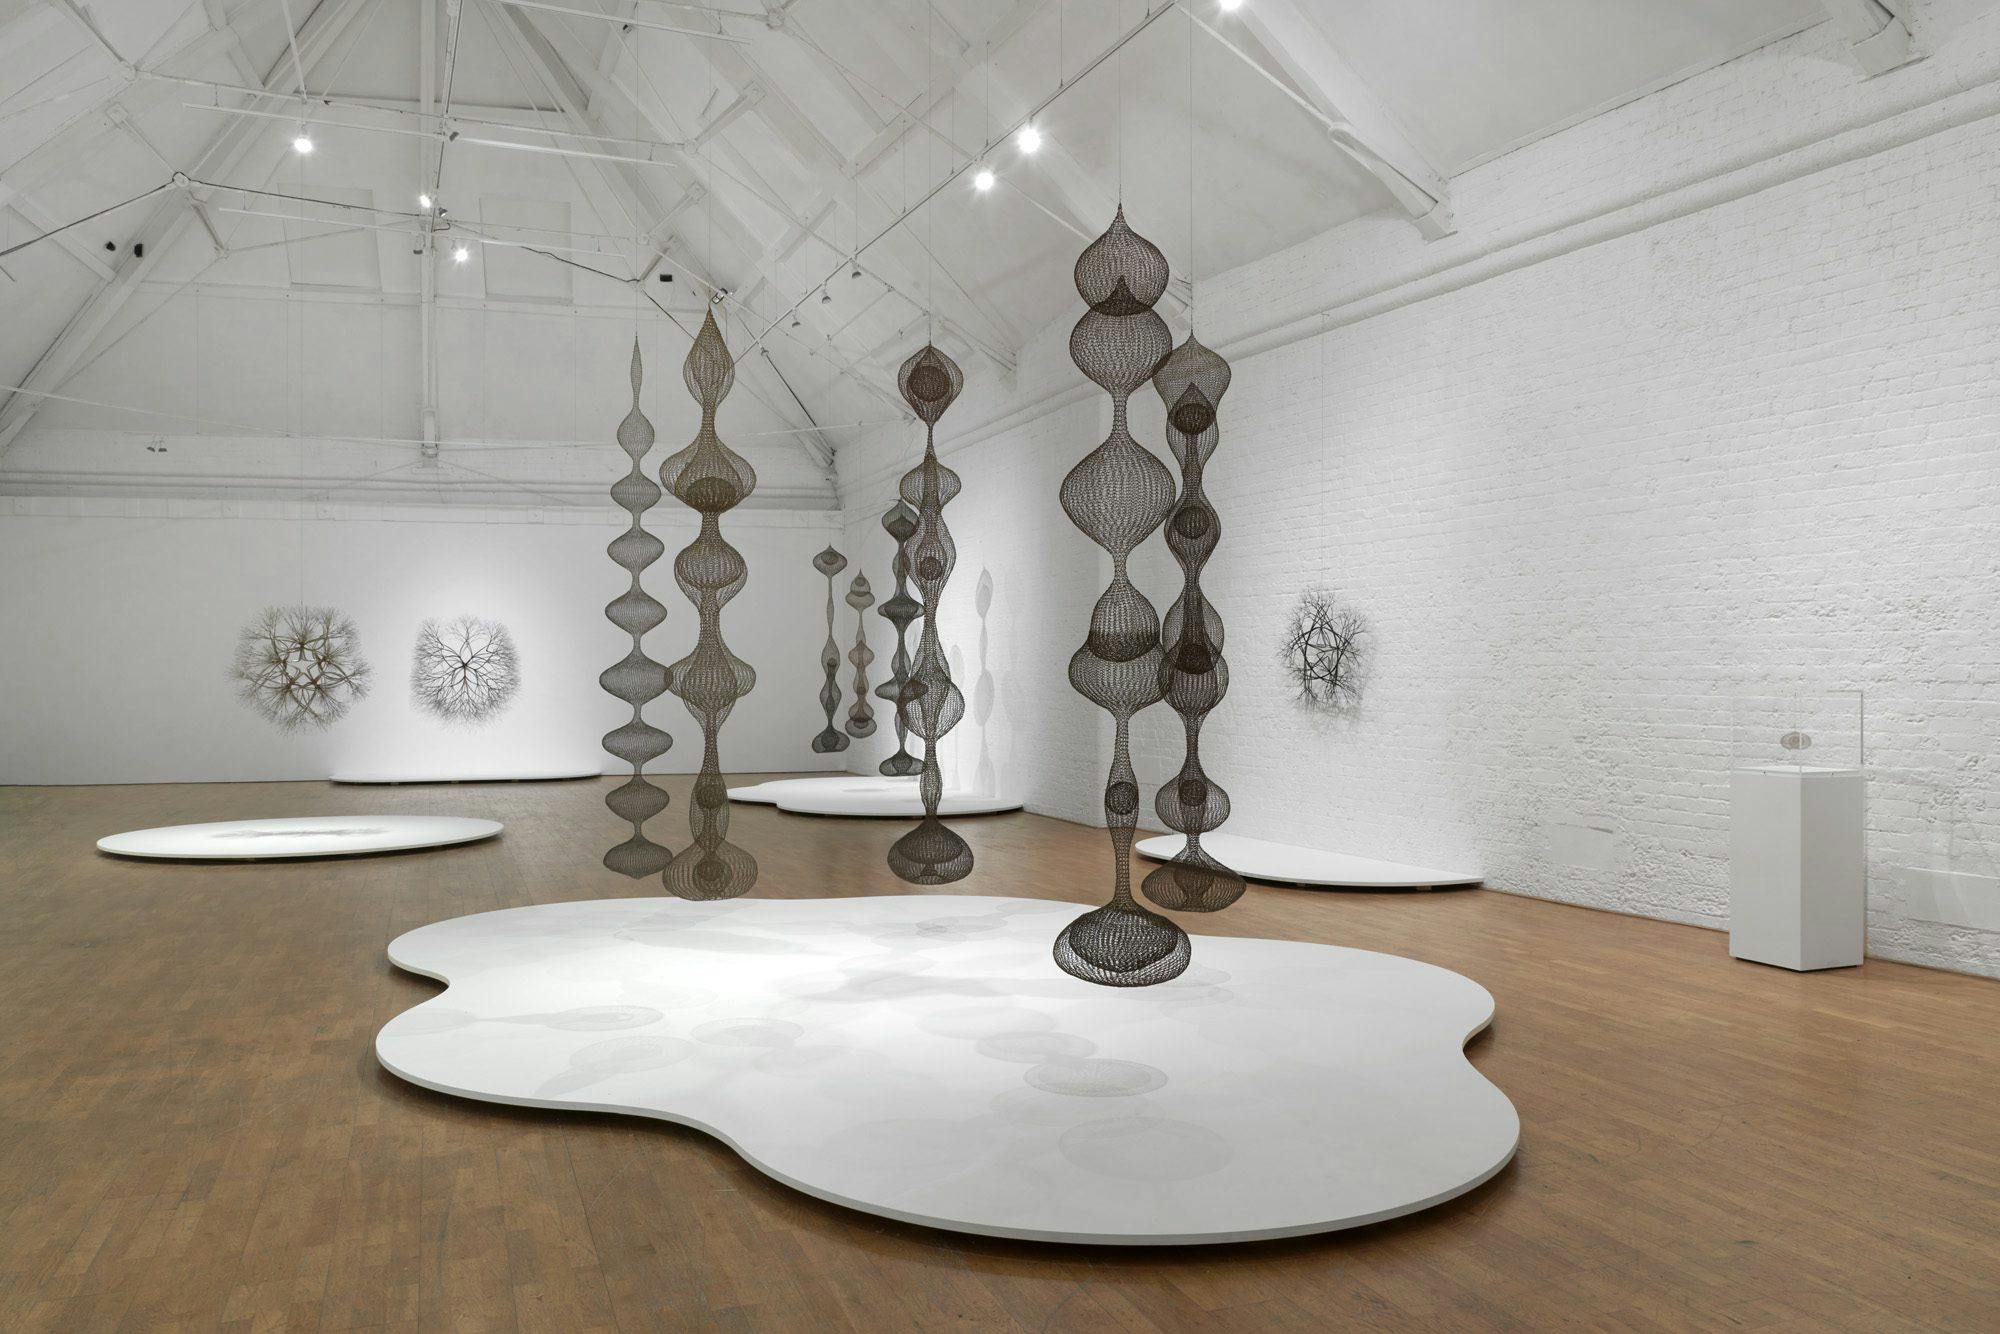 Installation view of the exhibition, Ruth Asawa: Citizen of the Universe, at Modern Art Oxford in Oxford, dated 2022.